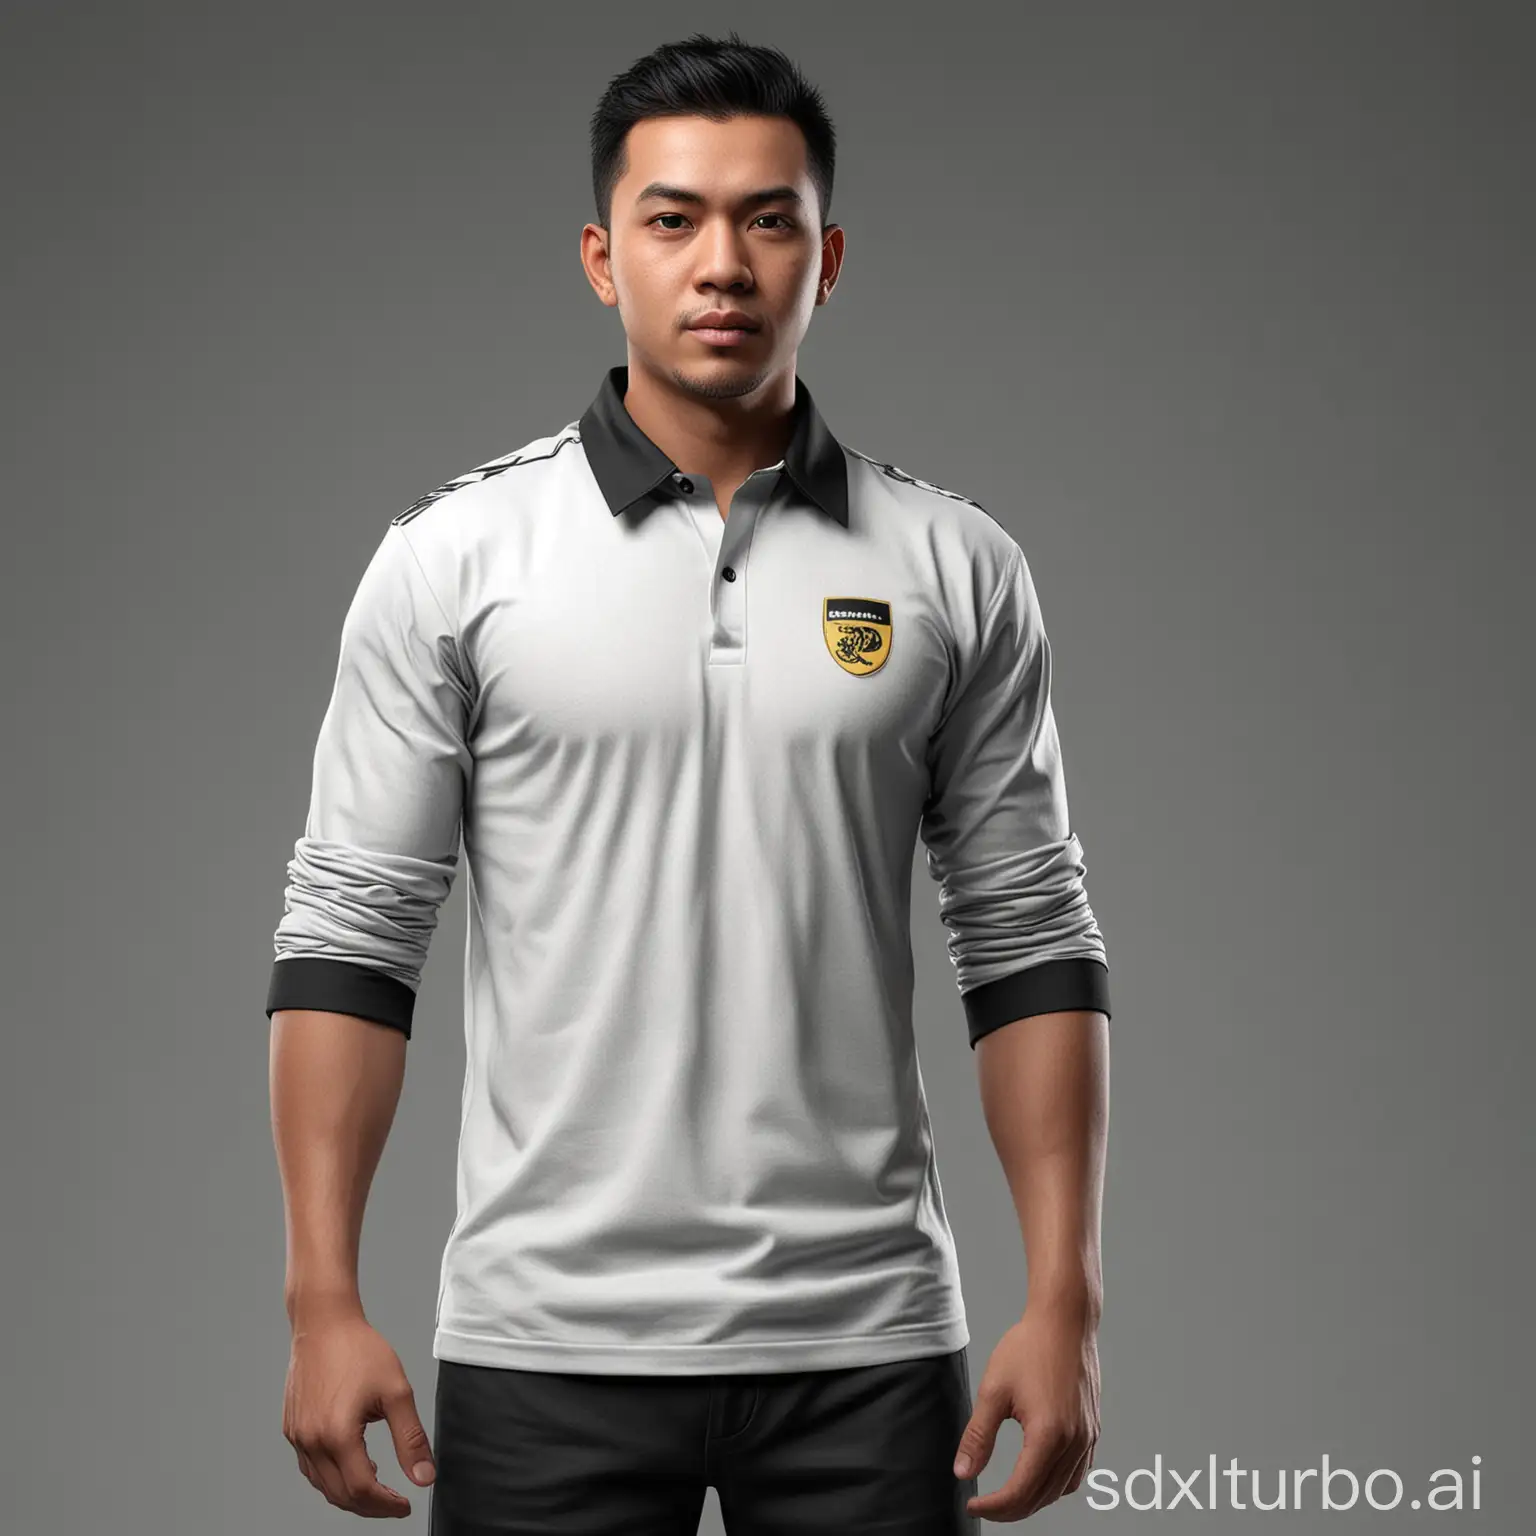 Tall-Indonesian-Man-in-Sports-Jersey-Standing-with-a-Faint-Smile